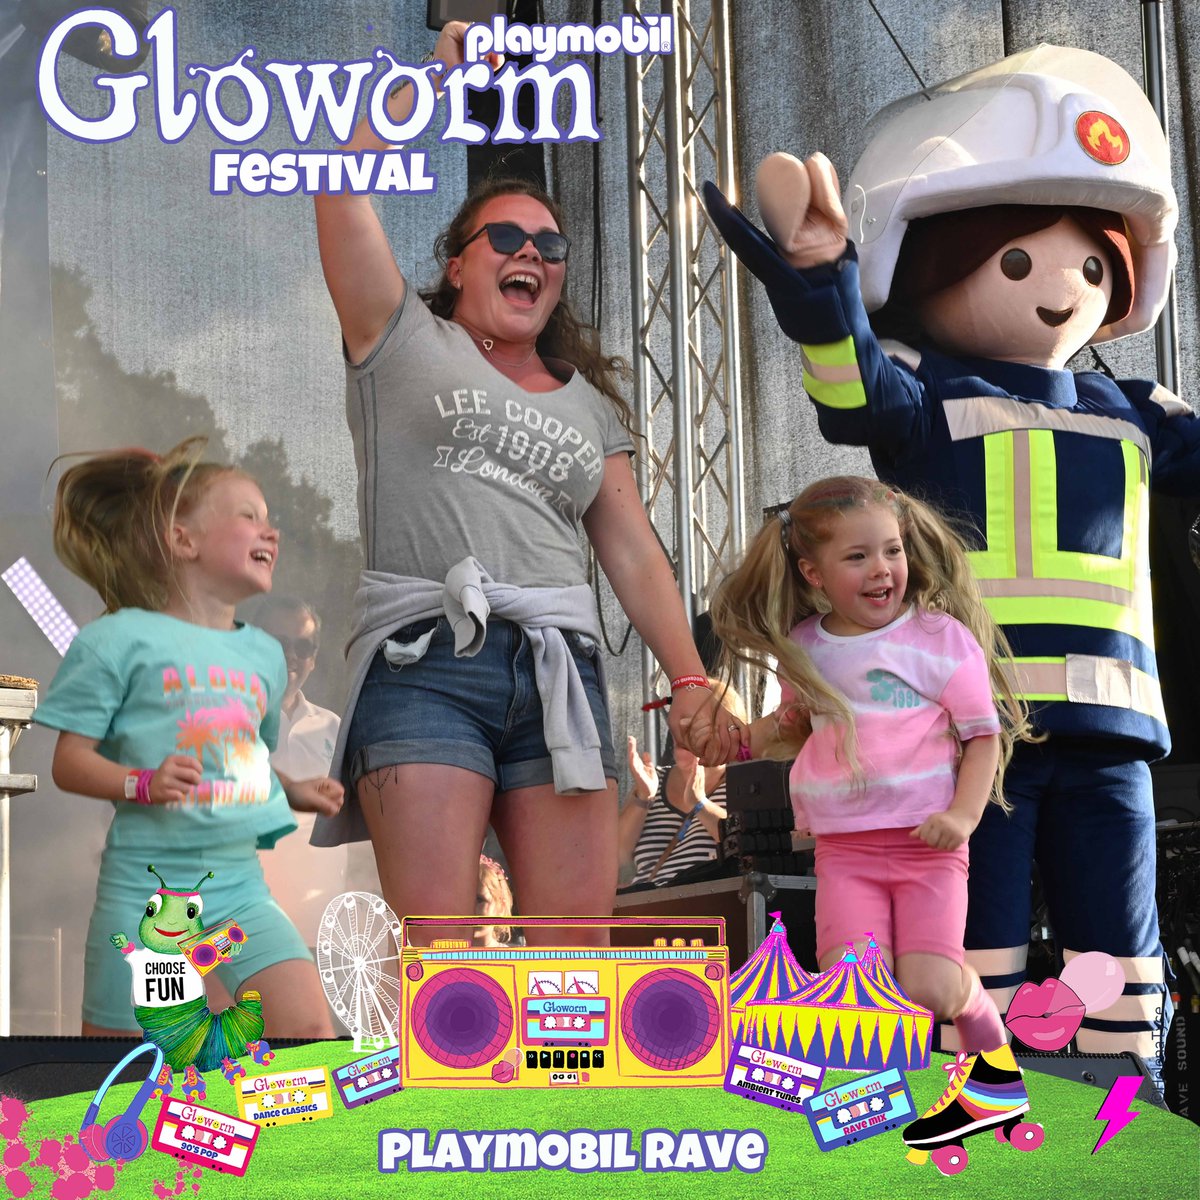 We are thrilled to announce that @PlaymobilUK are back as the headline sponsors of Gloworm for the 6th year! 🎉 Once again, They will be bringing their play village, designed to let your Glowormers imaginations run wild and the super popular Playmobil rave on both nights! 💃🏽🤩